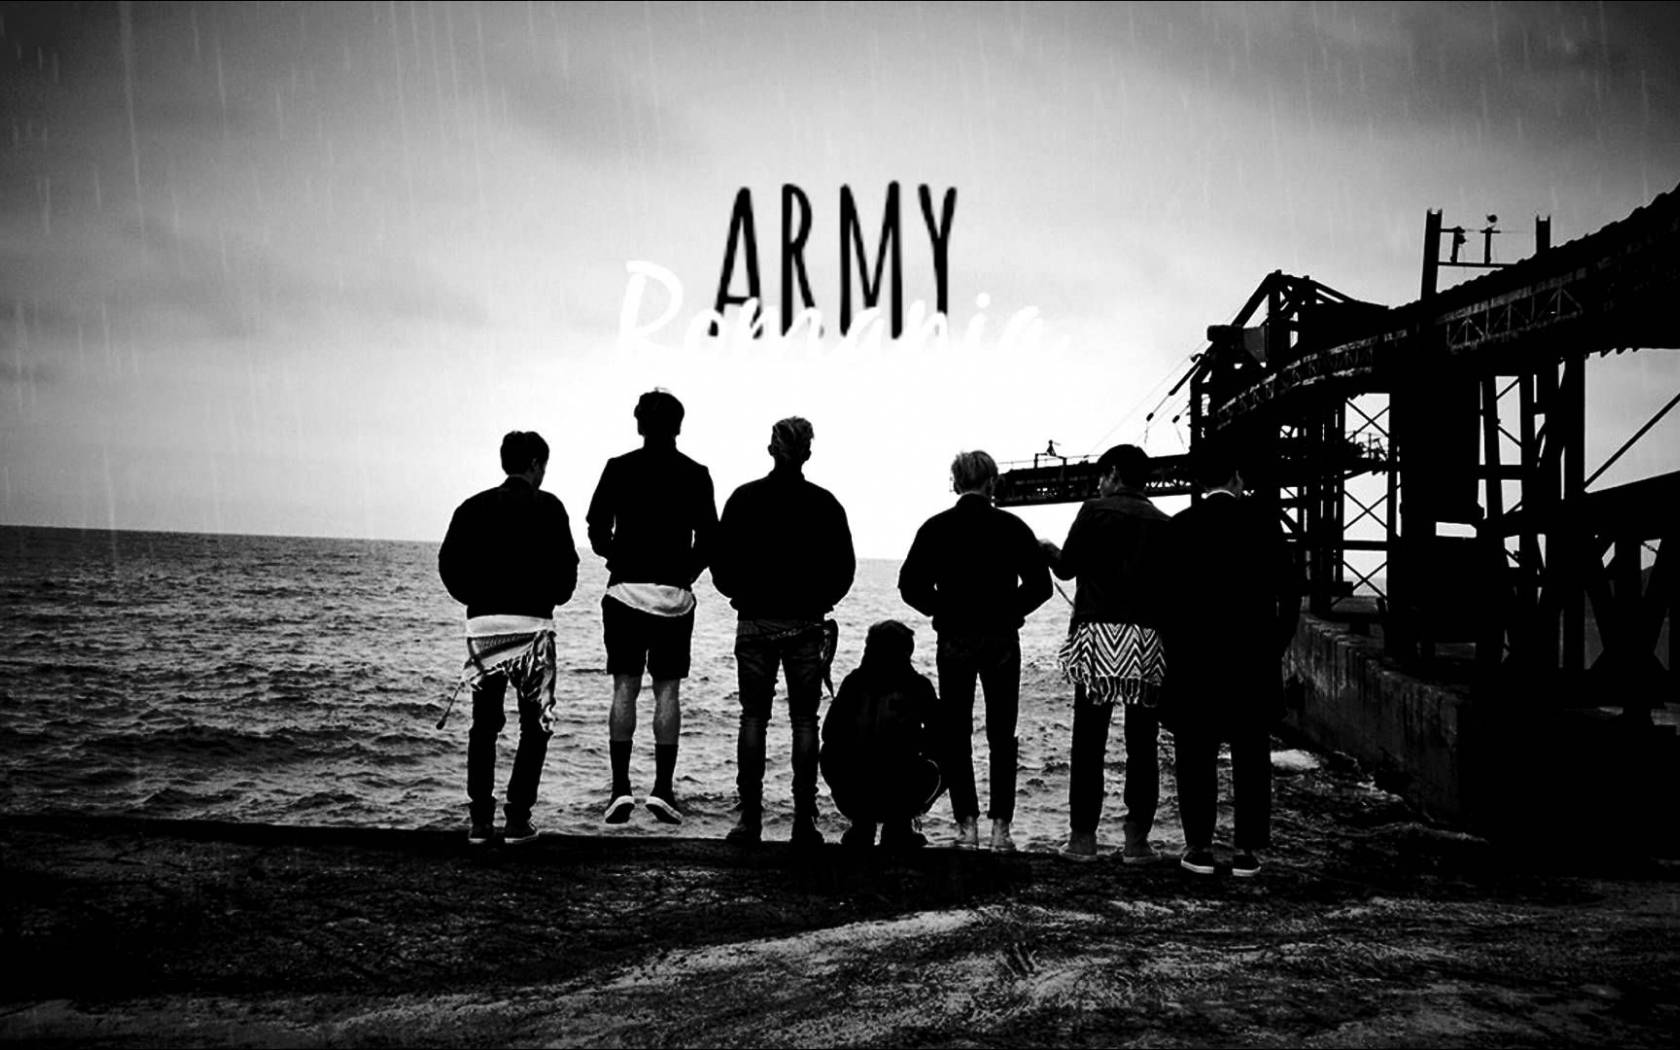 Bts Standing By The Sea Black And White Laptop Background